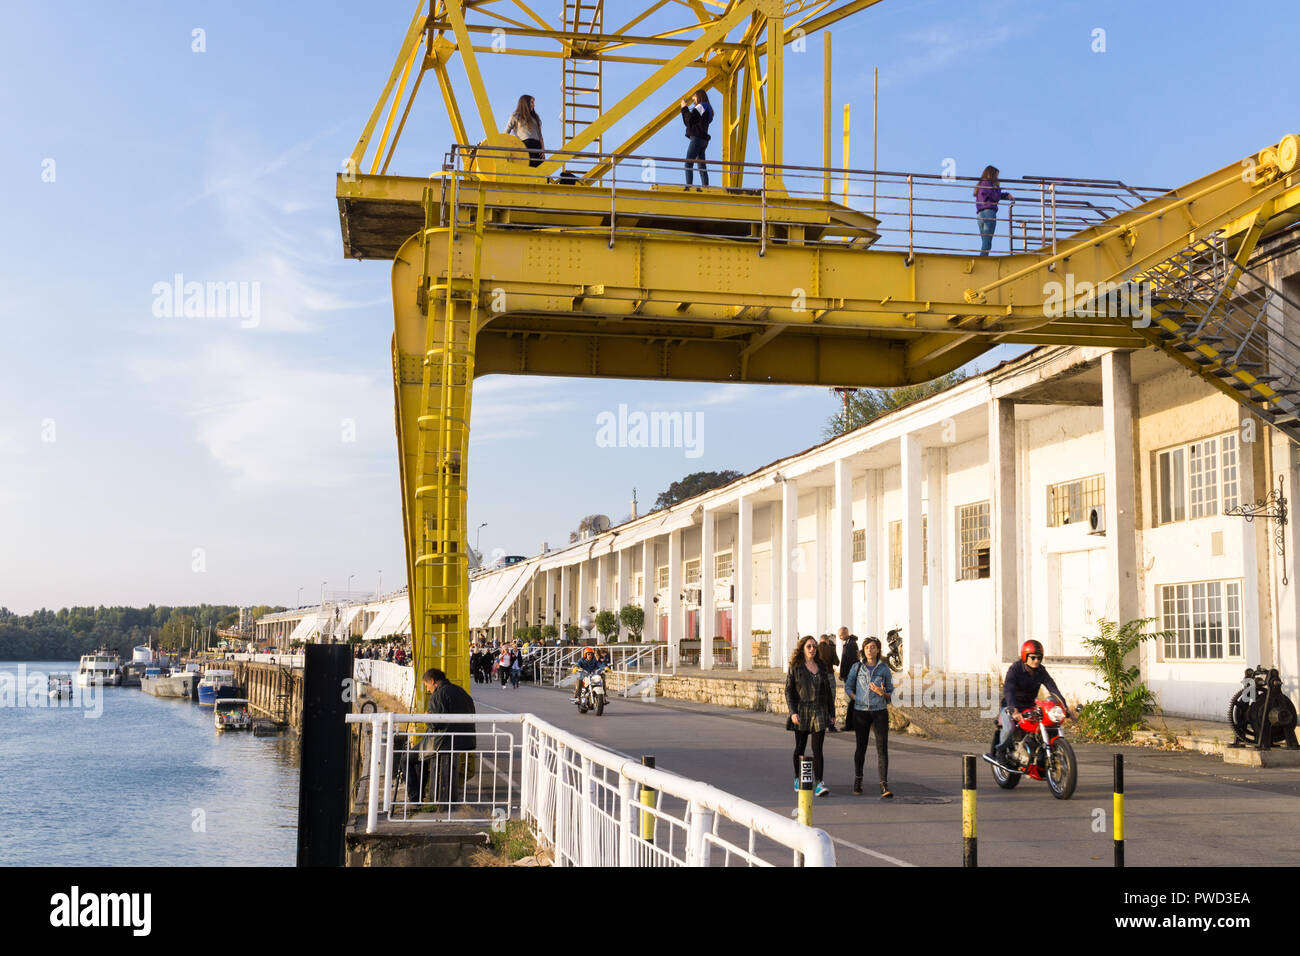 Yellow crane of the Belgrade Port on the Sava River and the Beton Hala (Concrete Hall) in the background. Stock Photo